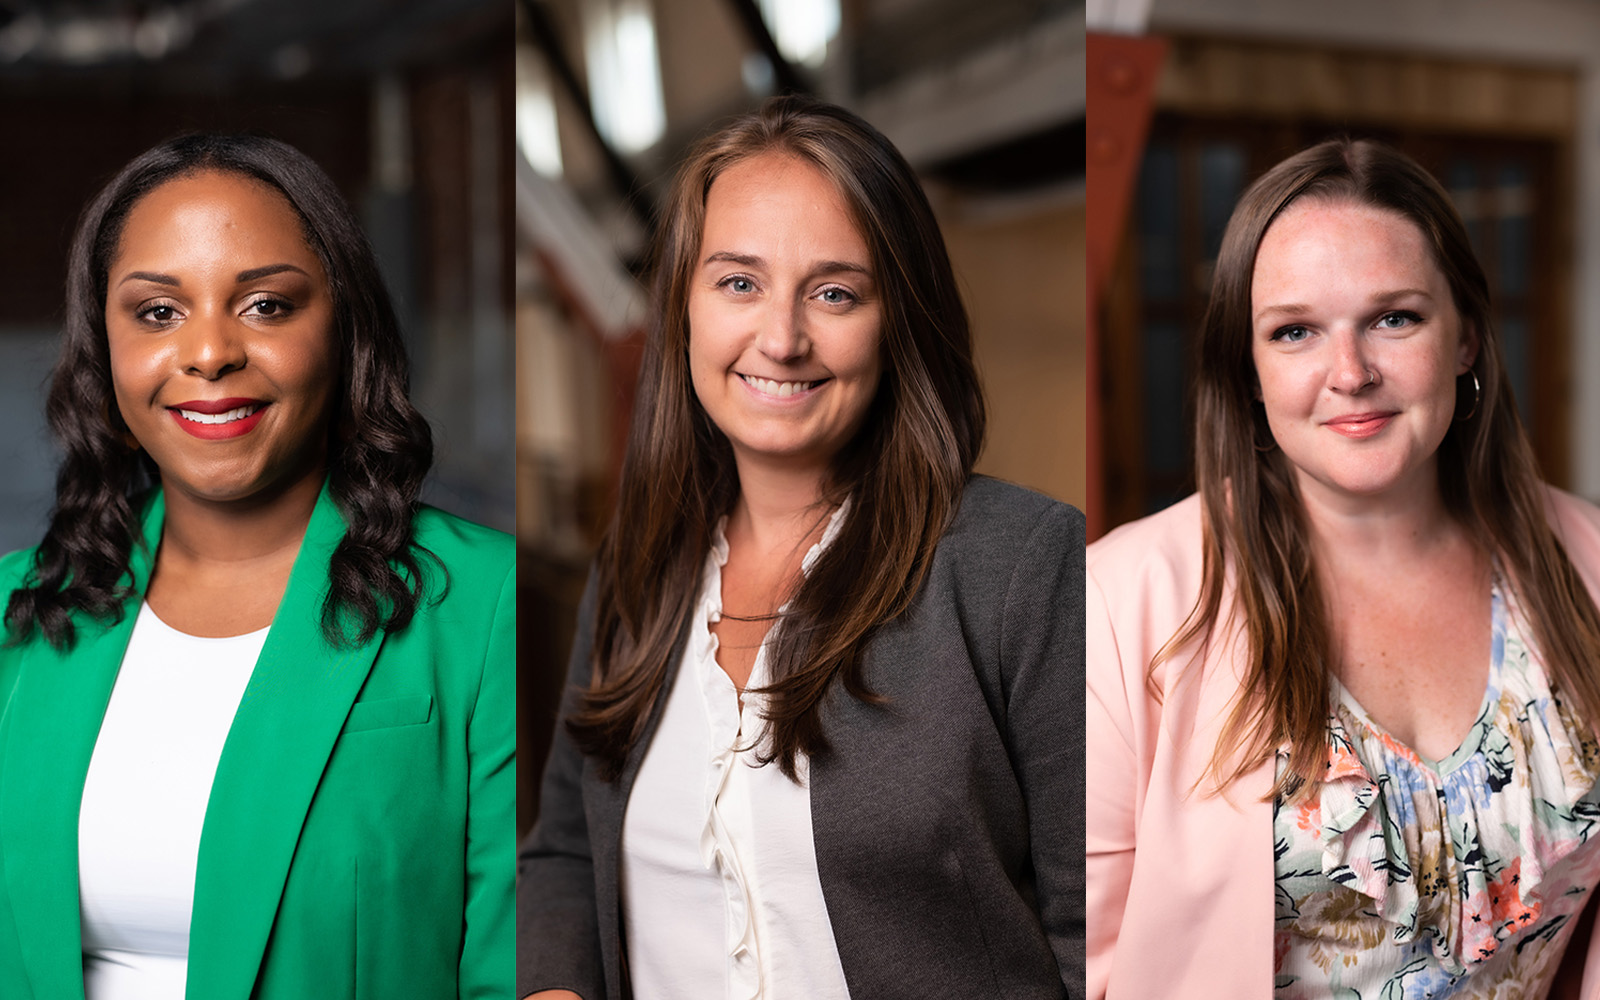 Left to Right, Tammy Hendricks ’19 EMBA, Lindsay Castonguay Hany ’08 MBA, and Katherine Donovan ’09 have been named as honorees for HBJ's 40 Under Forty 2022 Class. (Contributed Photos)